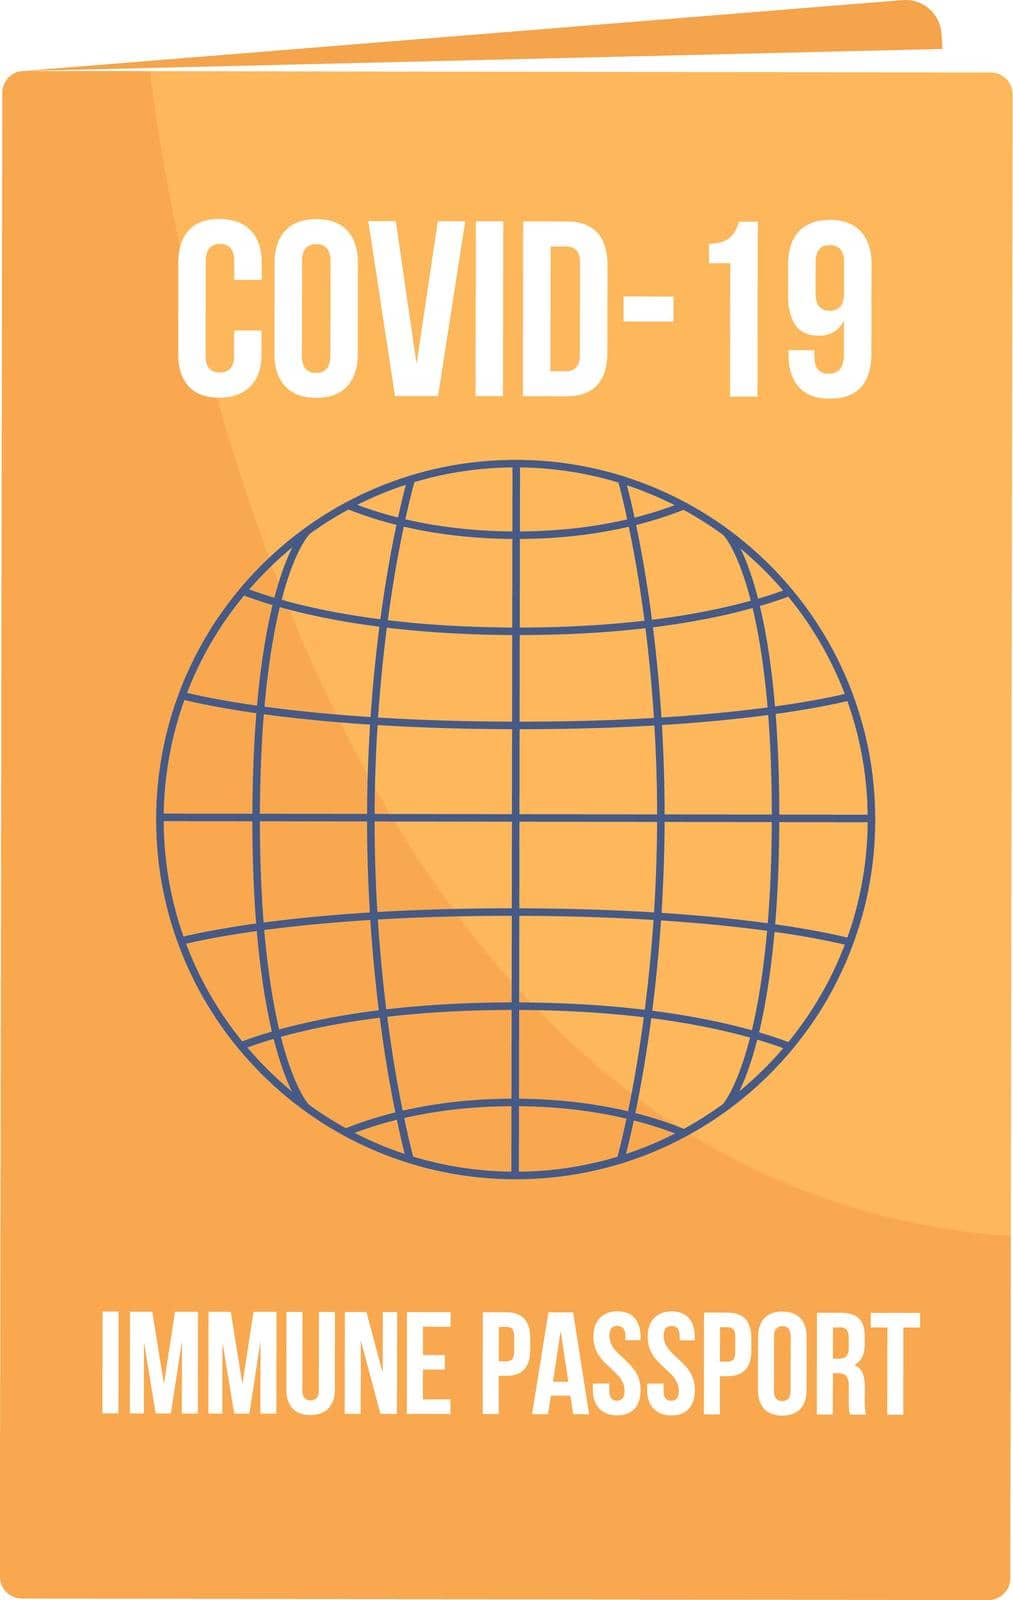 Covid19 immunity passport semi flat color vector object. Realistic item on white. After covid travel safety isolated modern cartoon style illustration for graphic design and animation